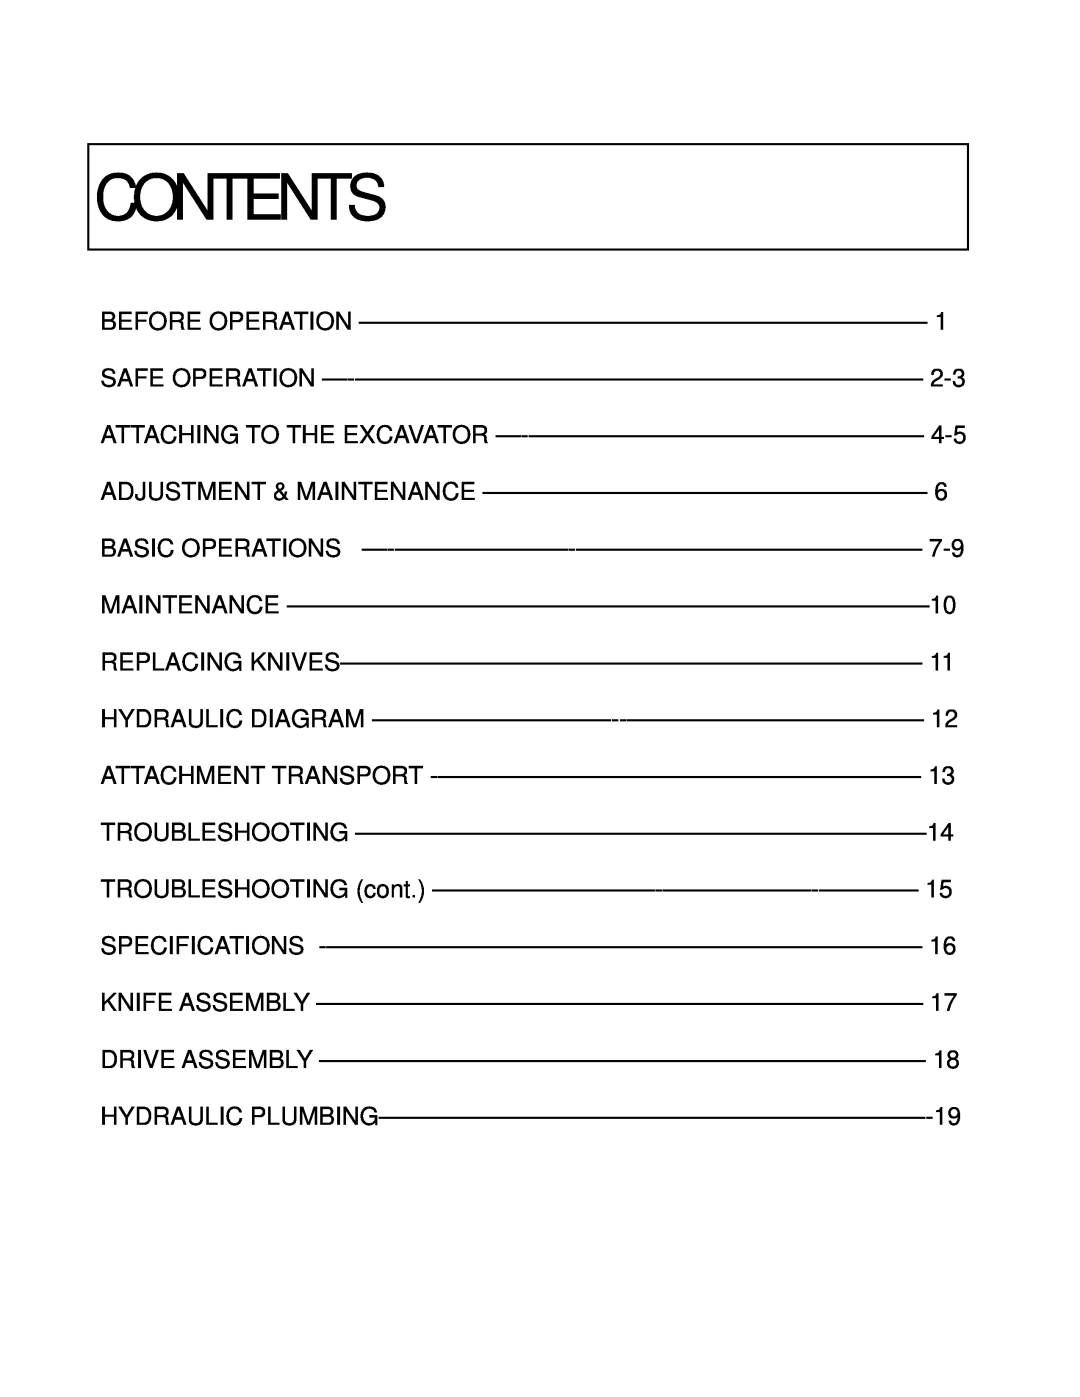 Generac Power Systems K4080 manual Contents 